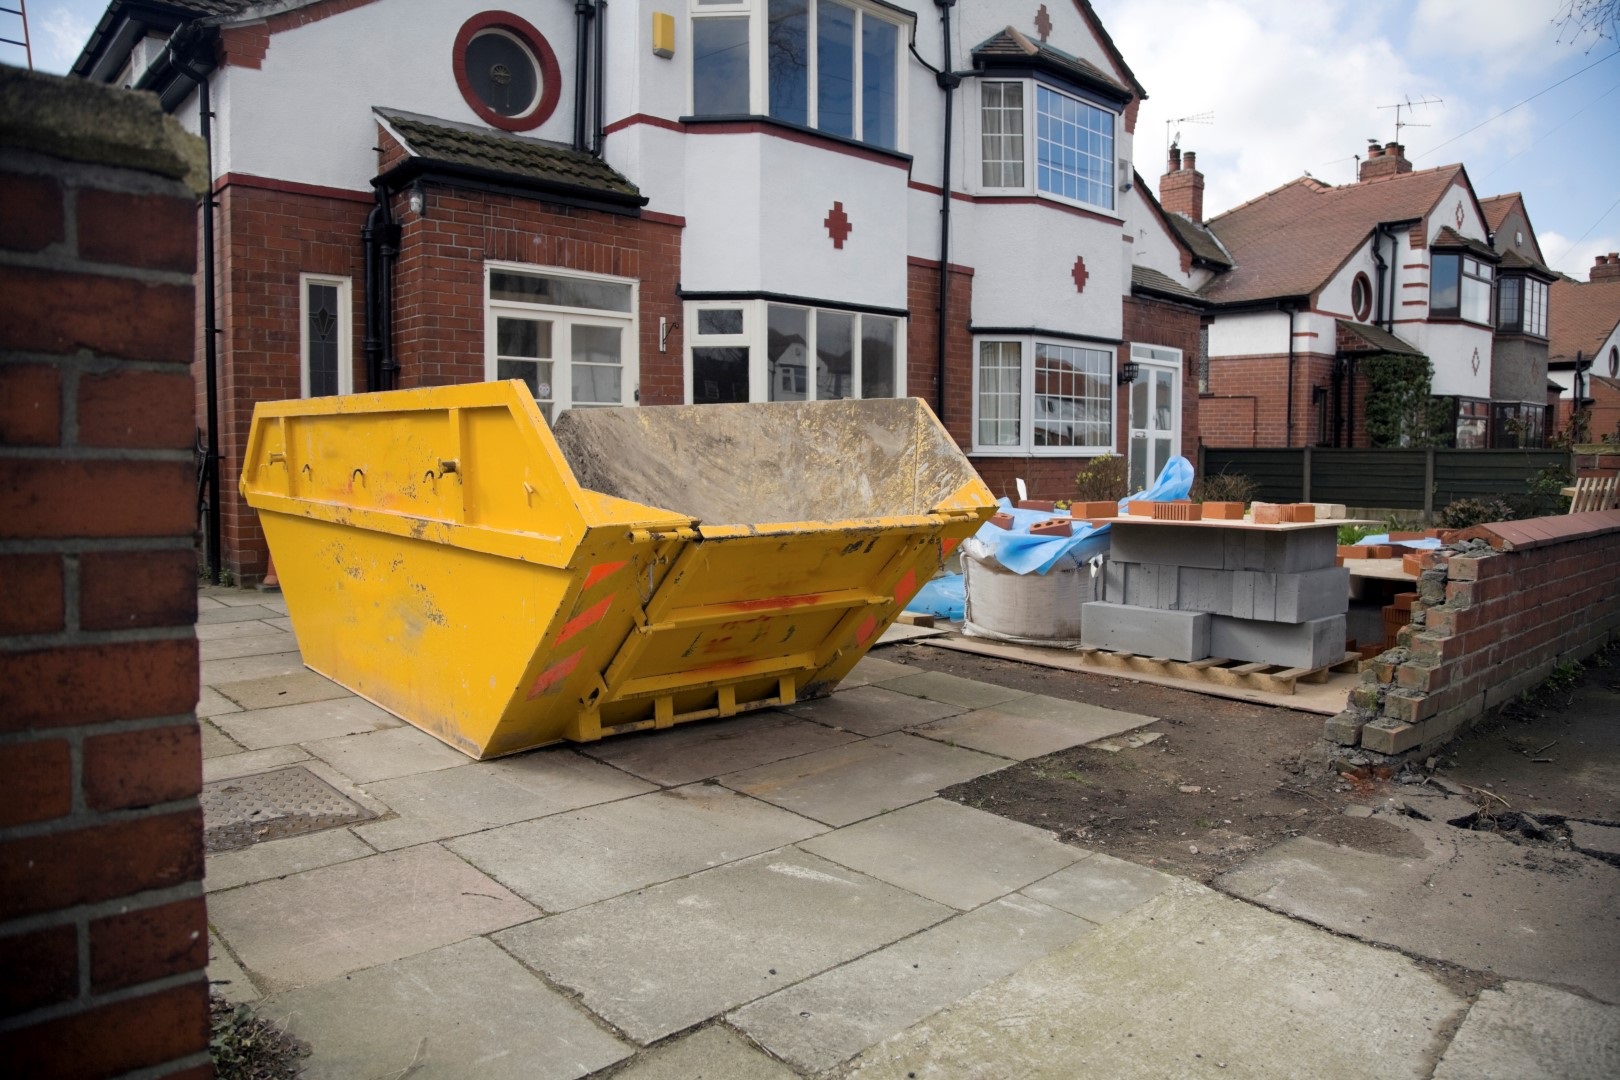 How much does it cost to hire a skip in Bolton?